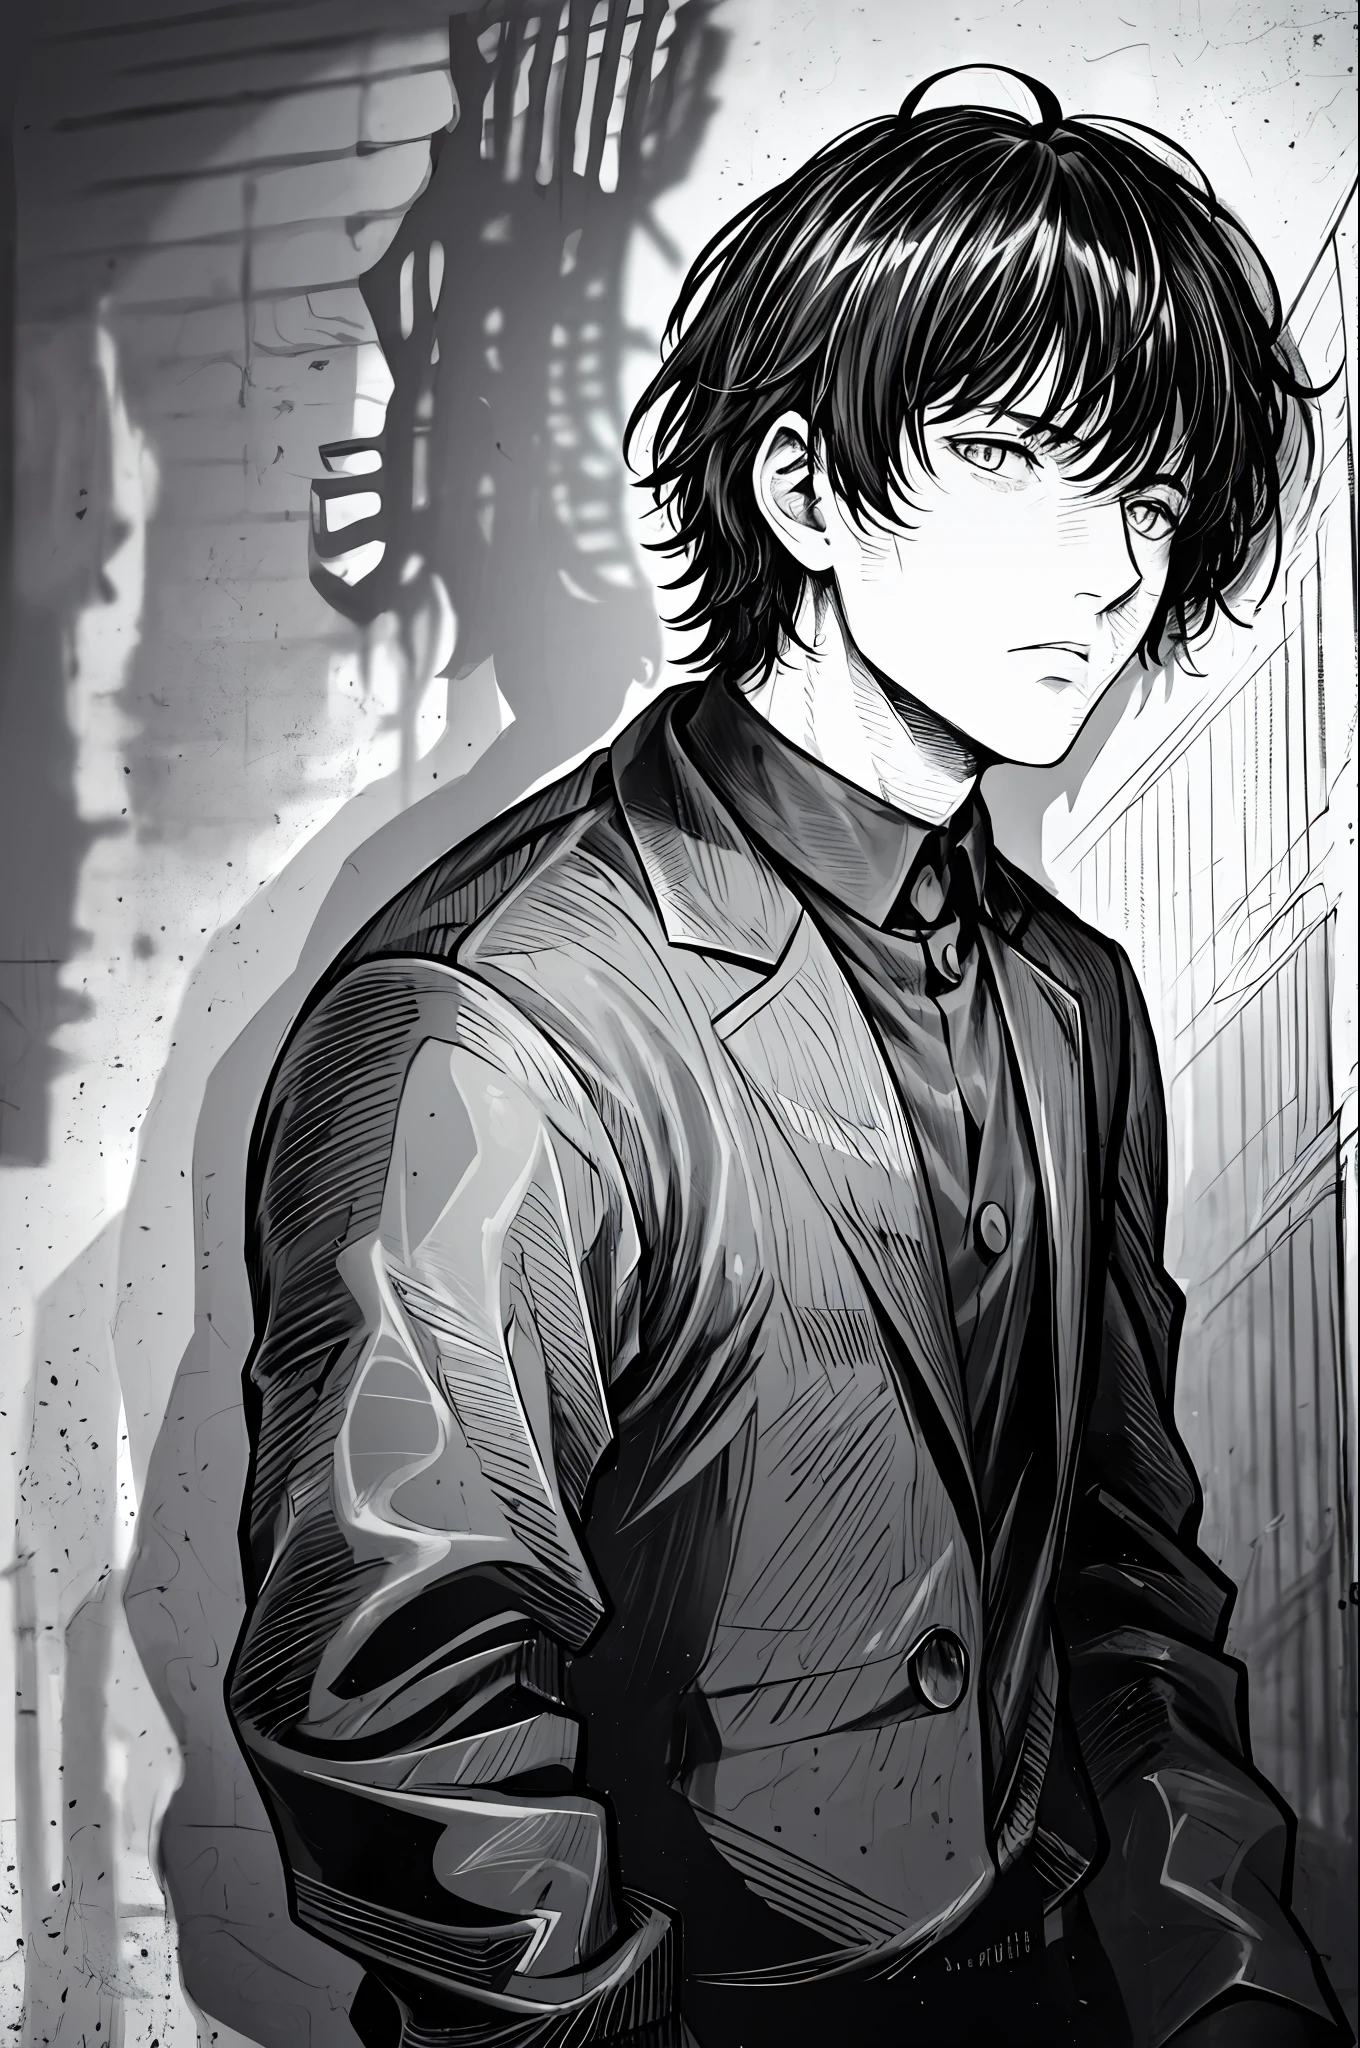 (Masterpiece, best quality:1.2),best quality, intricate details, lineart, monochrome1boy, short messy hair, young, handsome, black hair, messy hair, hair over one eye, sharp eyes, shirt, open jacket, Leaning against the wall , dim lighting, alley way